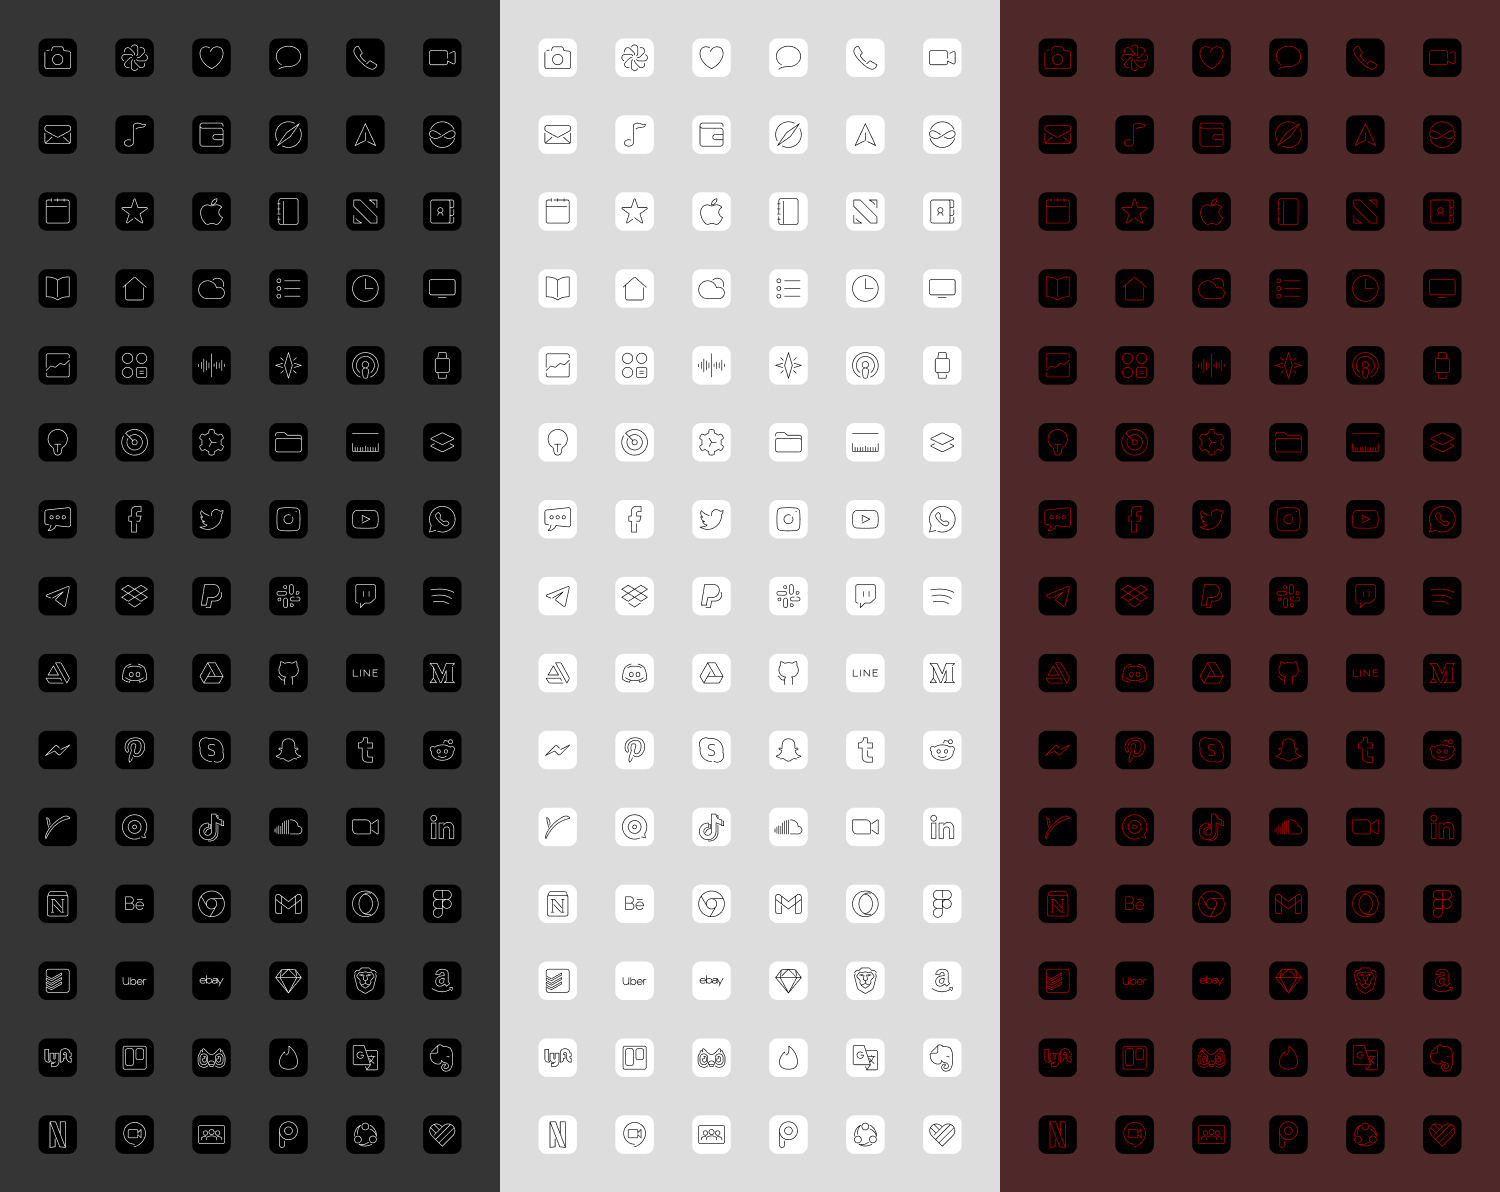 90 custom iOS icons in black, white and scarlet.